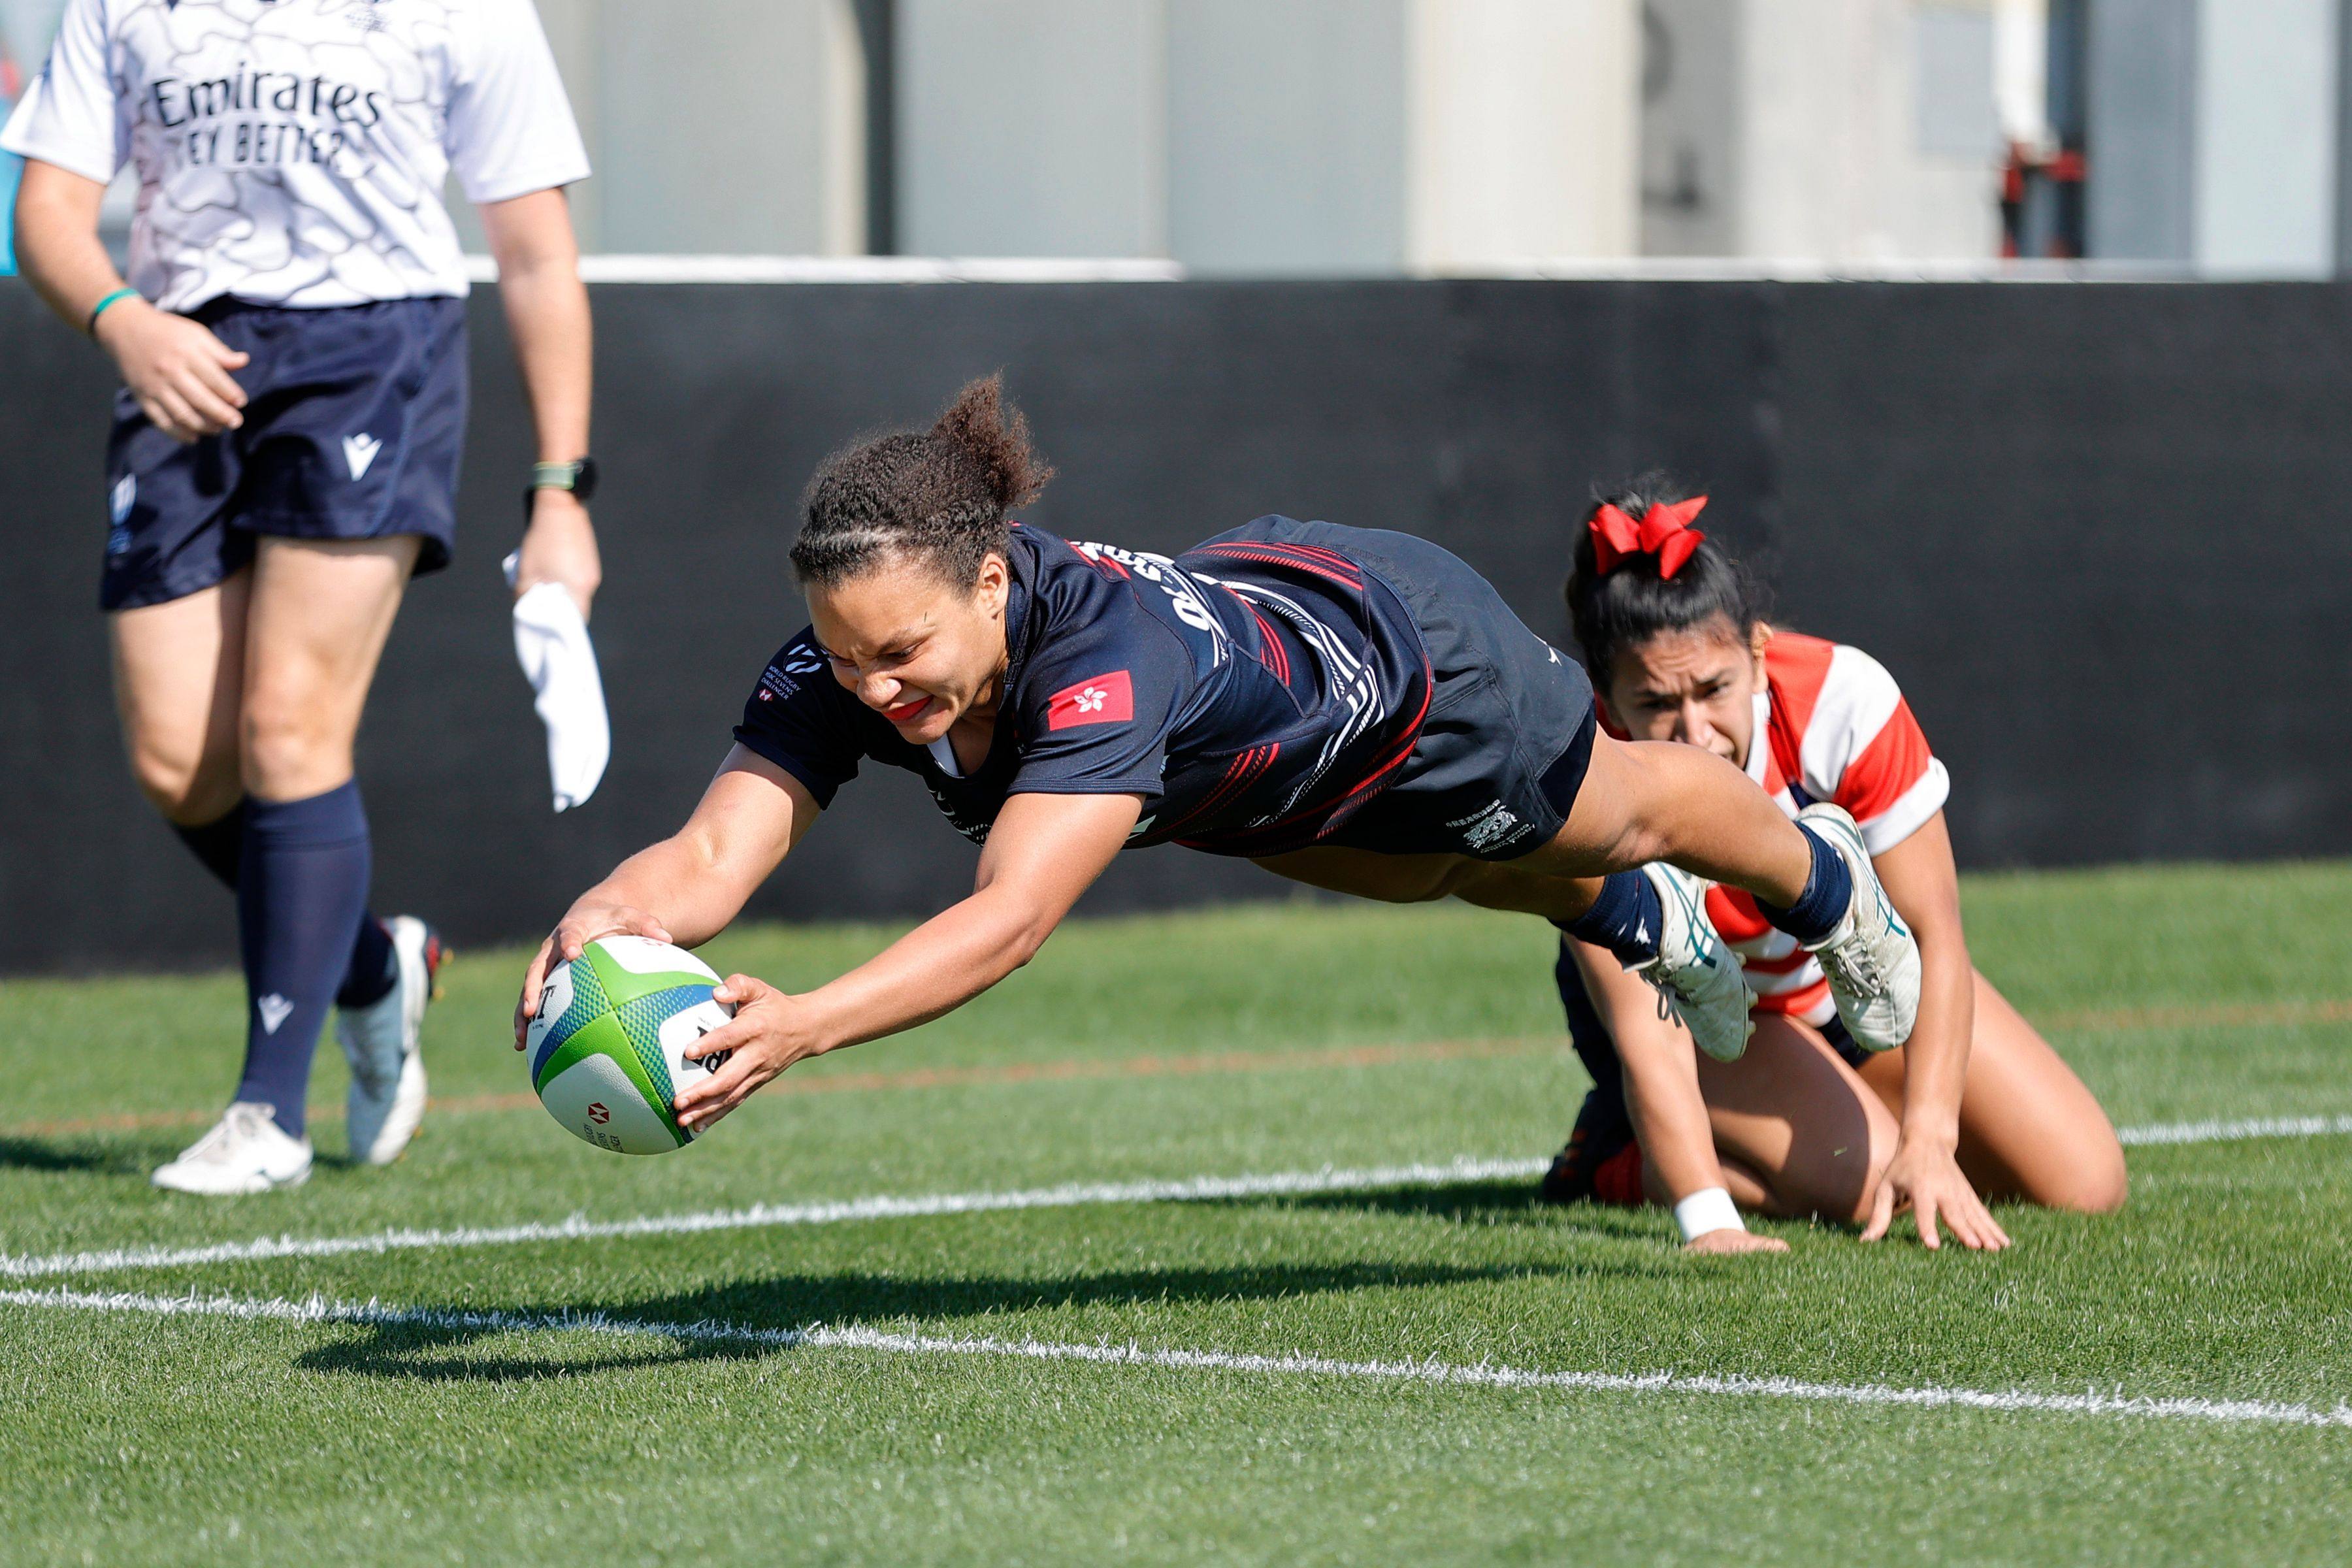 Hong Kong’s Natasha Olson-Thorne scores a try in her side’s opening game against Paraguay at the World Rugby Sevens Challenger Series in Dubai. Photo: World Rugby